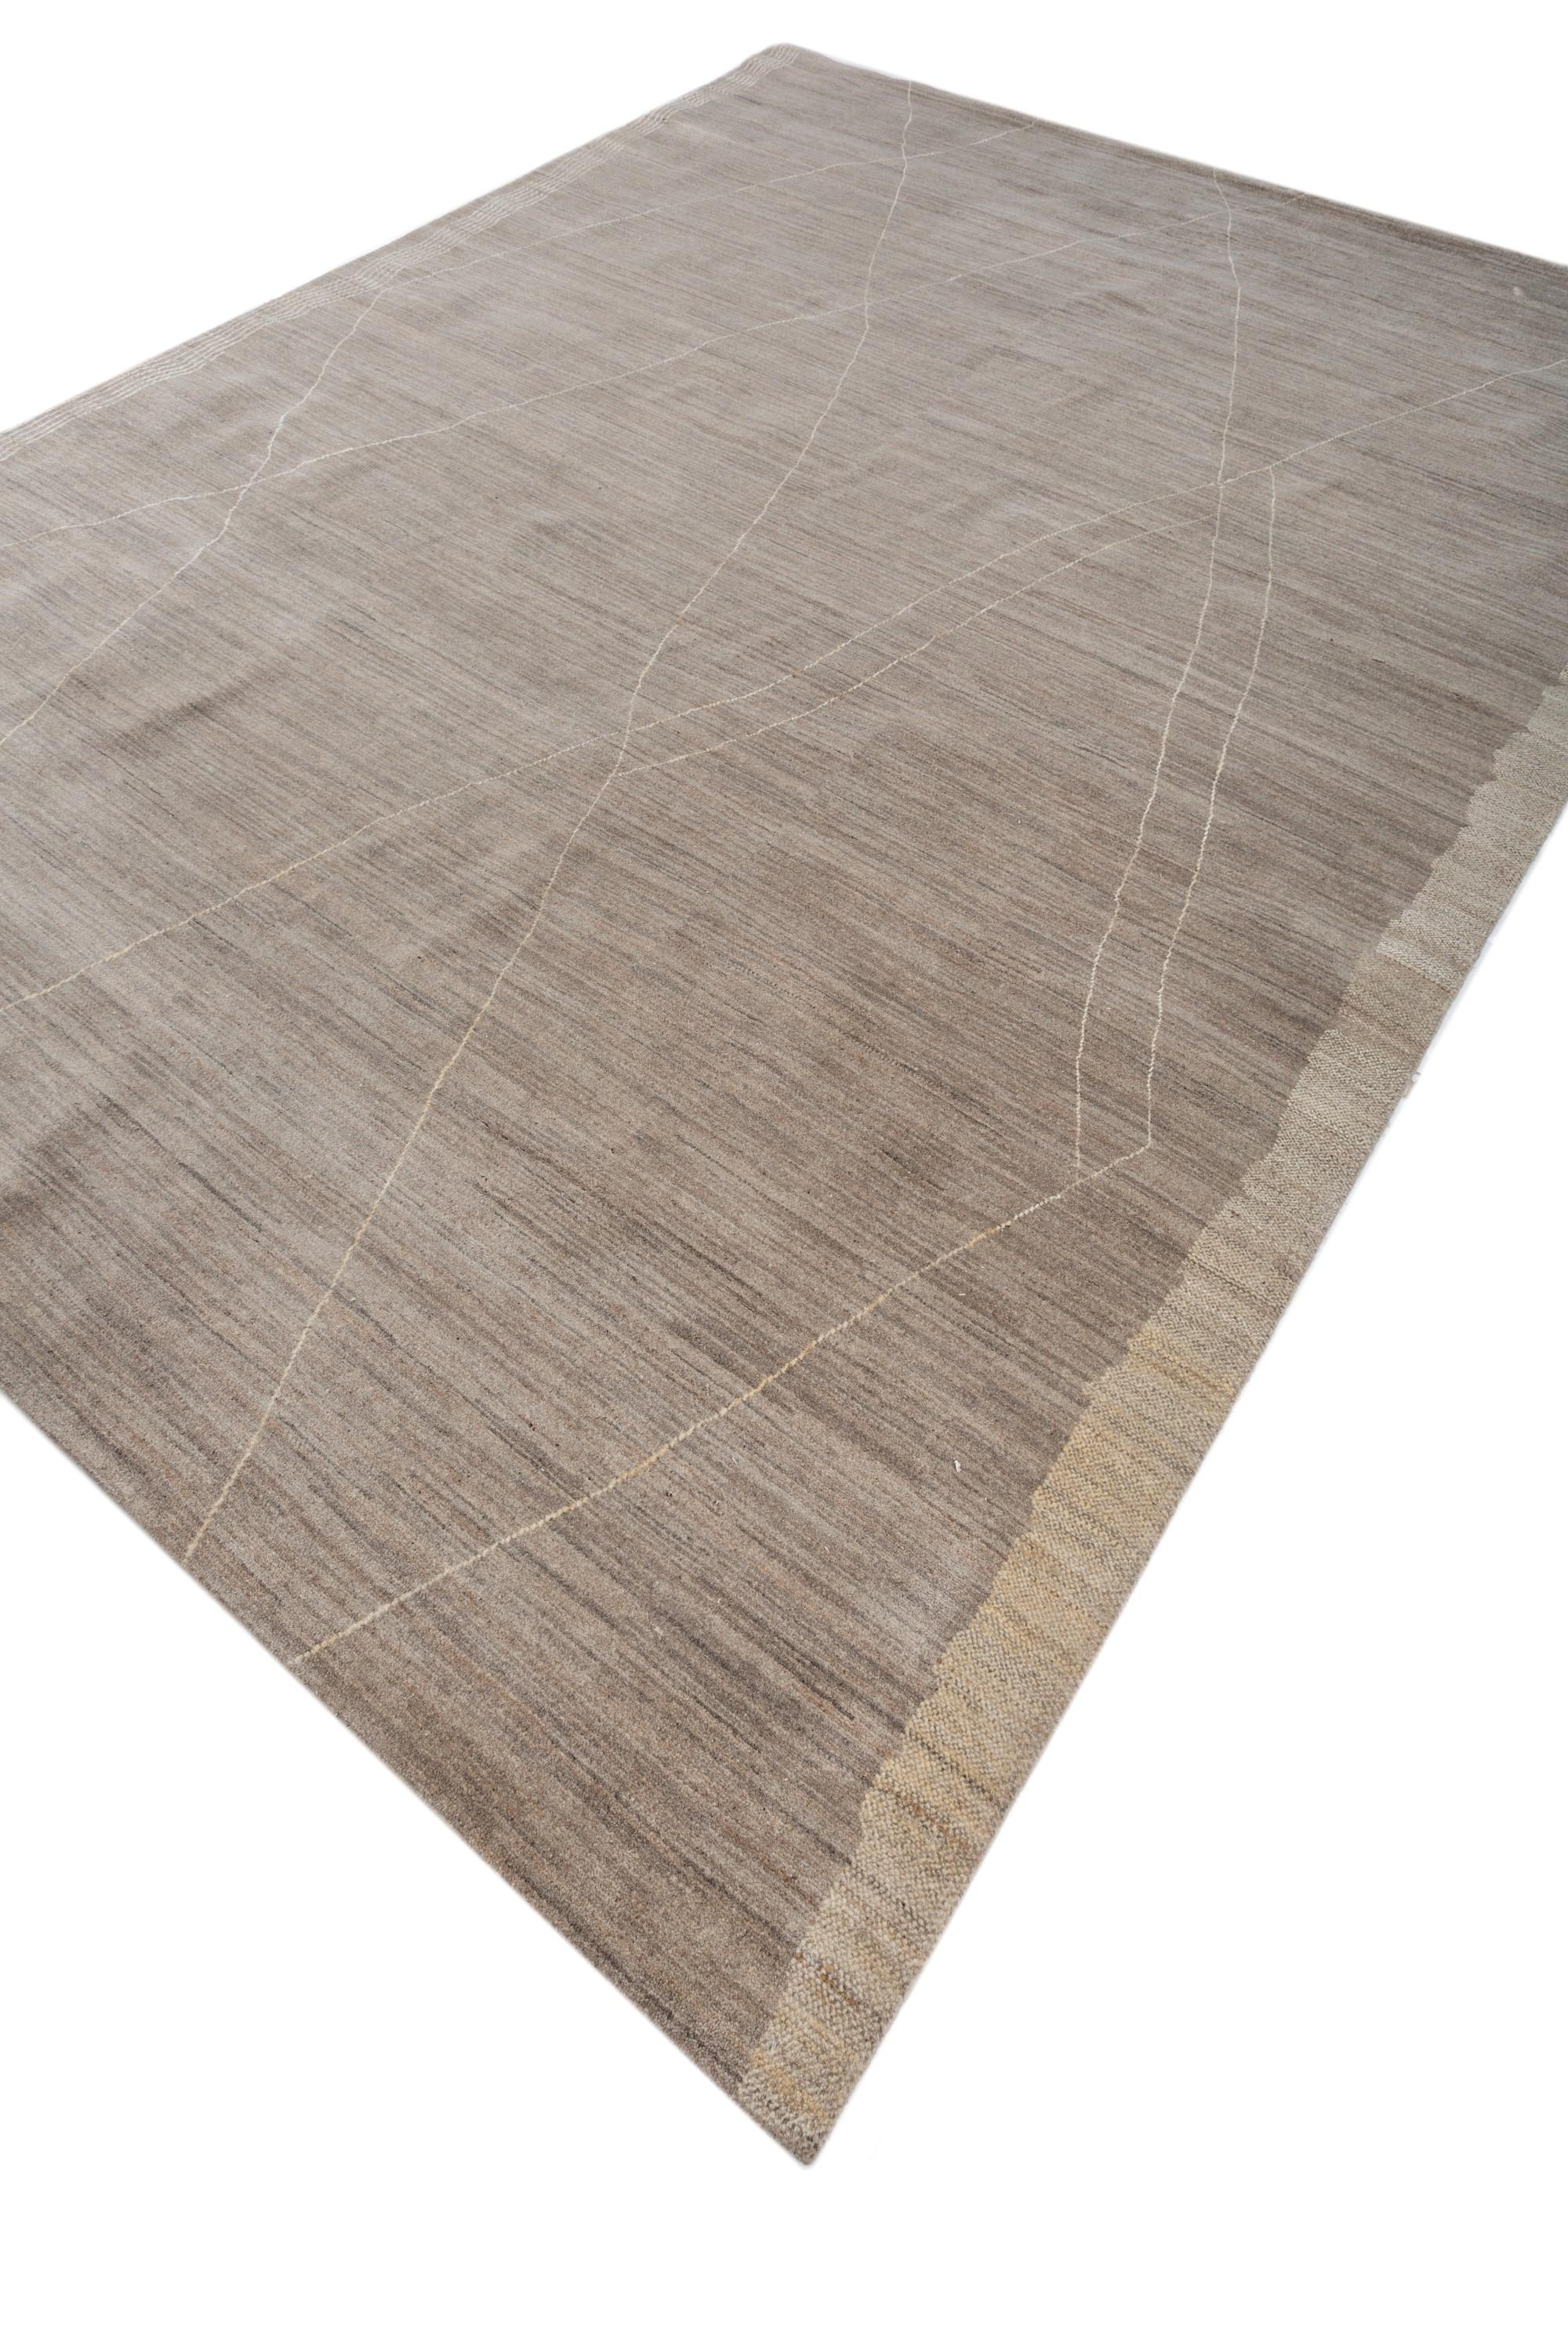 Tibetan Nomadic Nouveau Natural Gray & Natural White 240X300 cm Hand-Knotted Rug For Sale